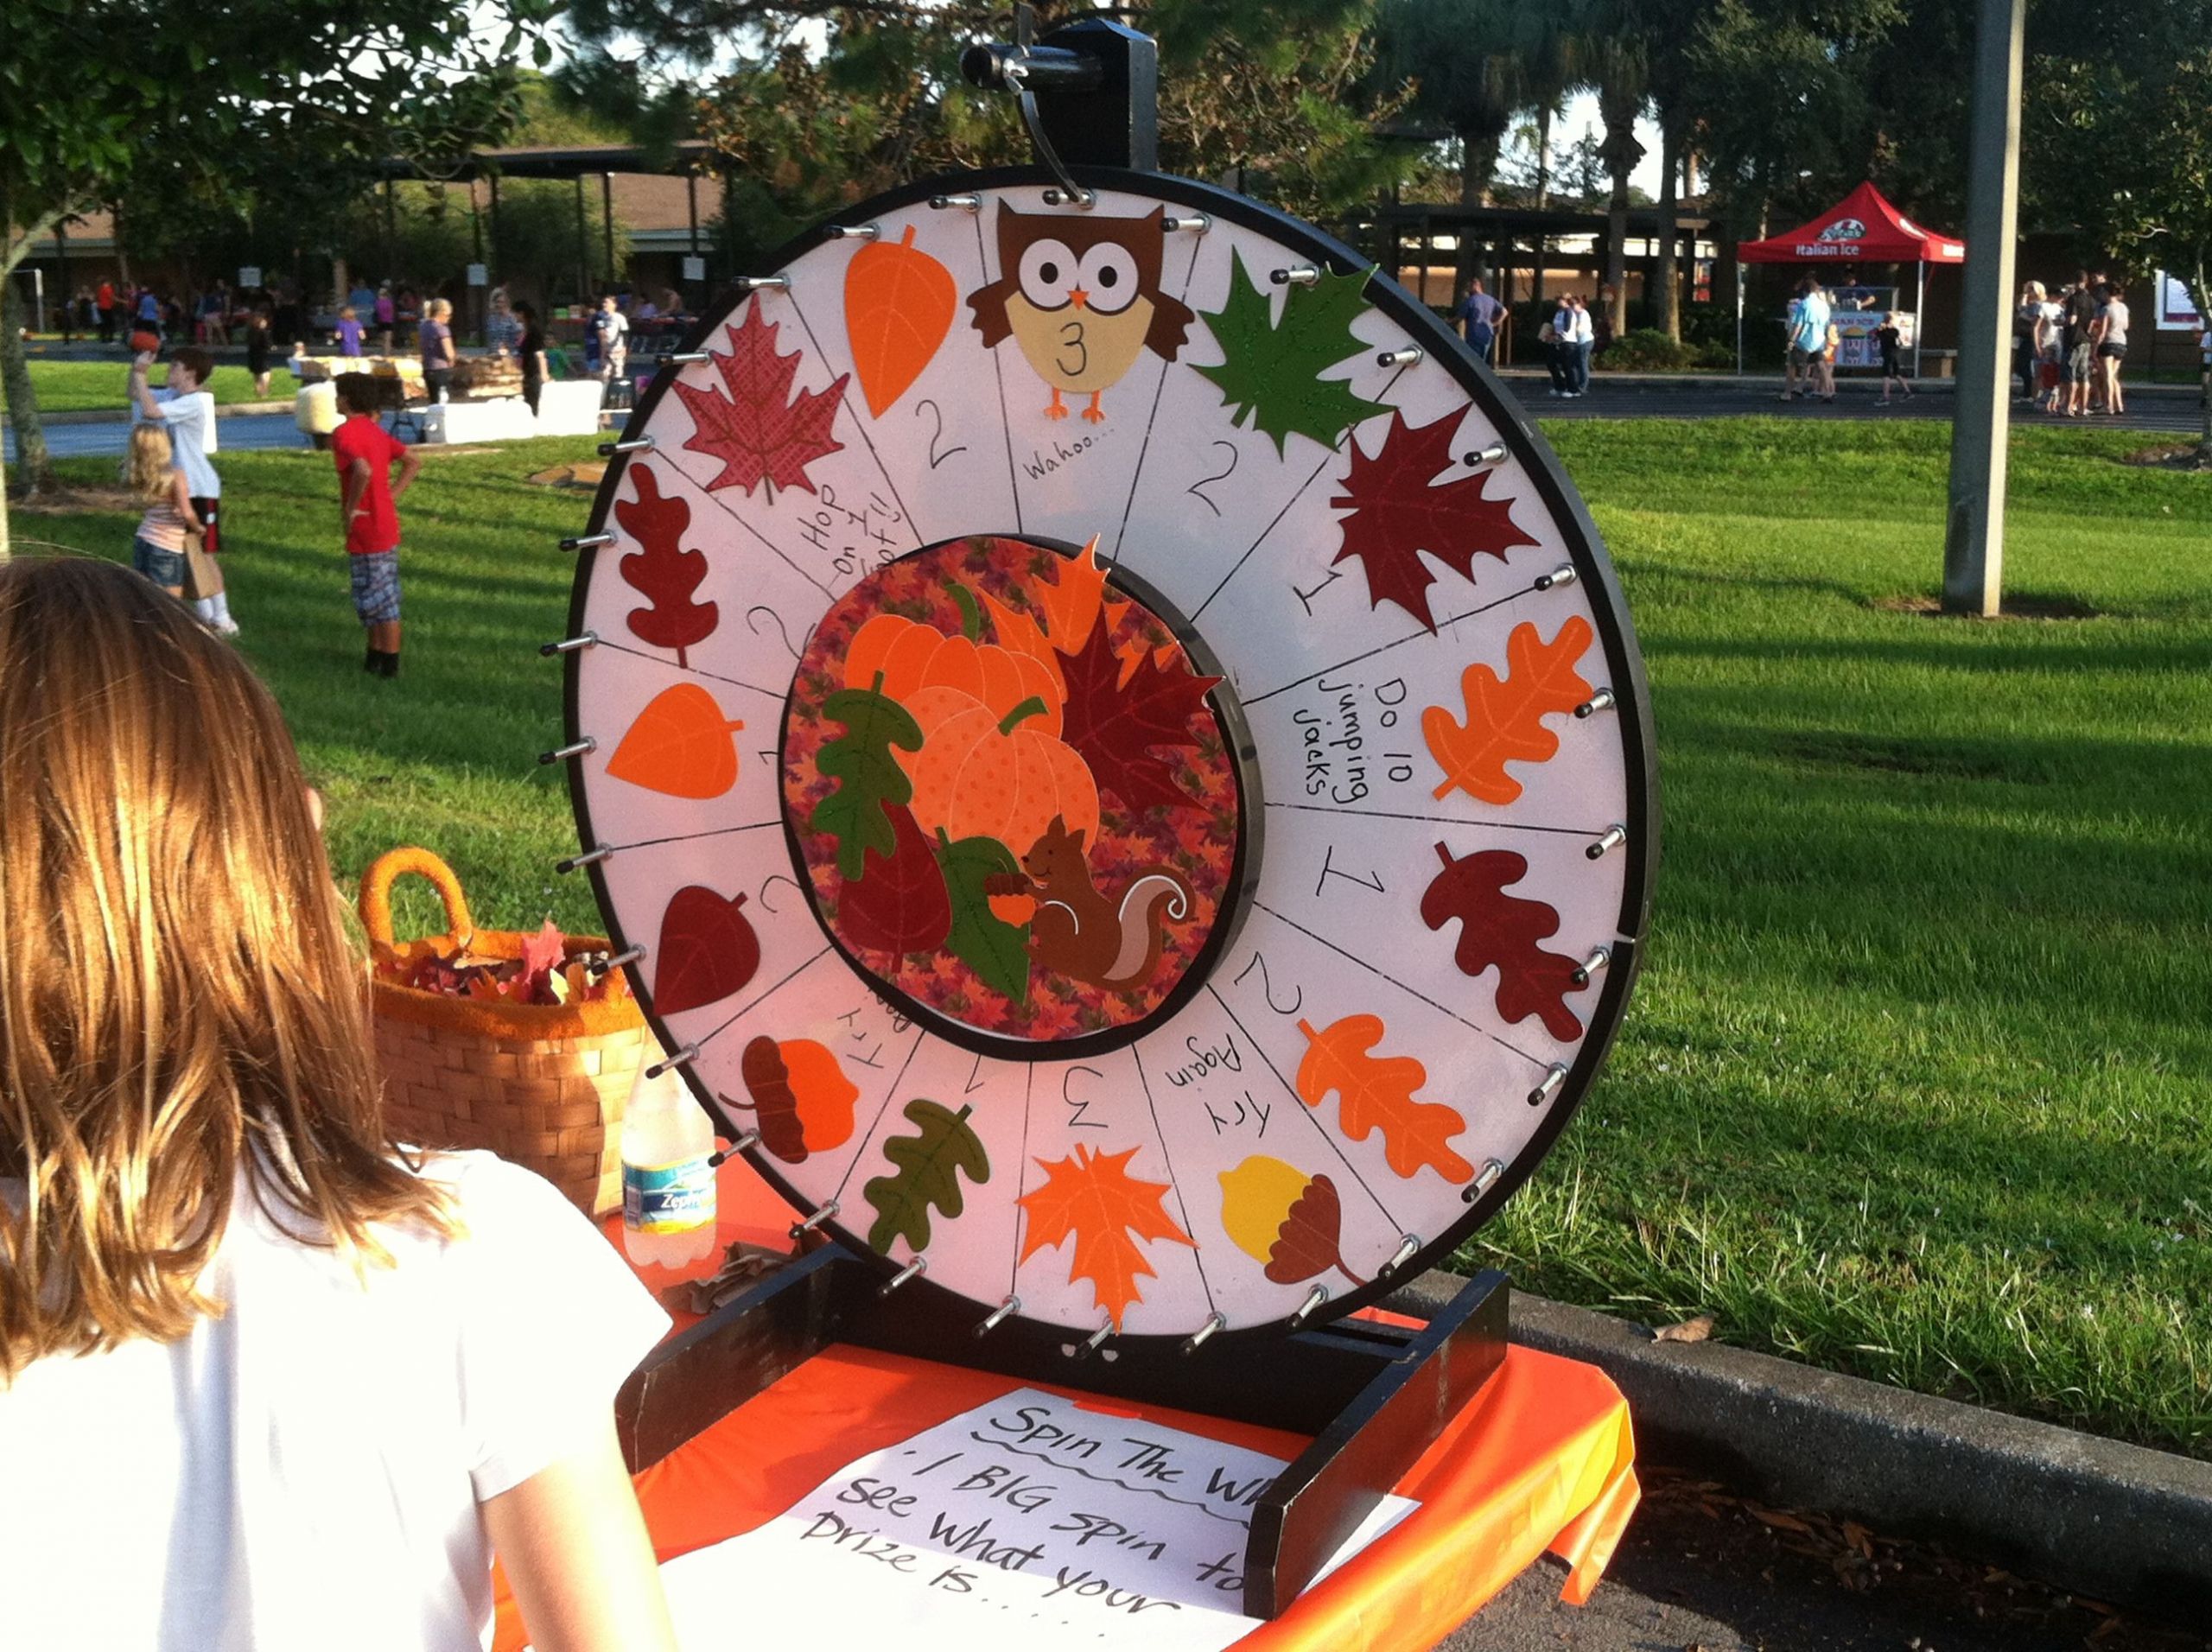 The Best Ideas for Fall Festival Ideas for Schools Home, Family